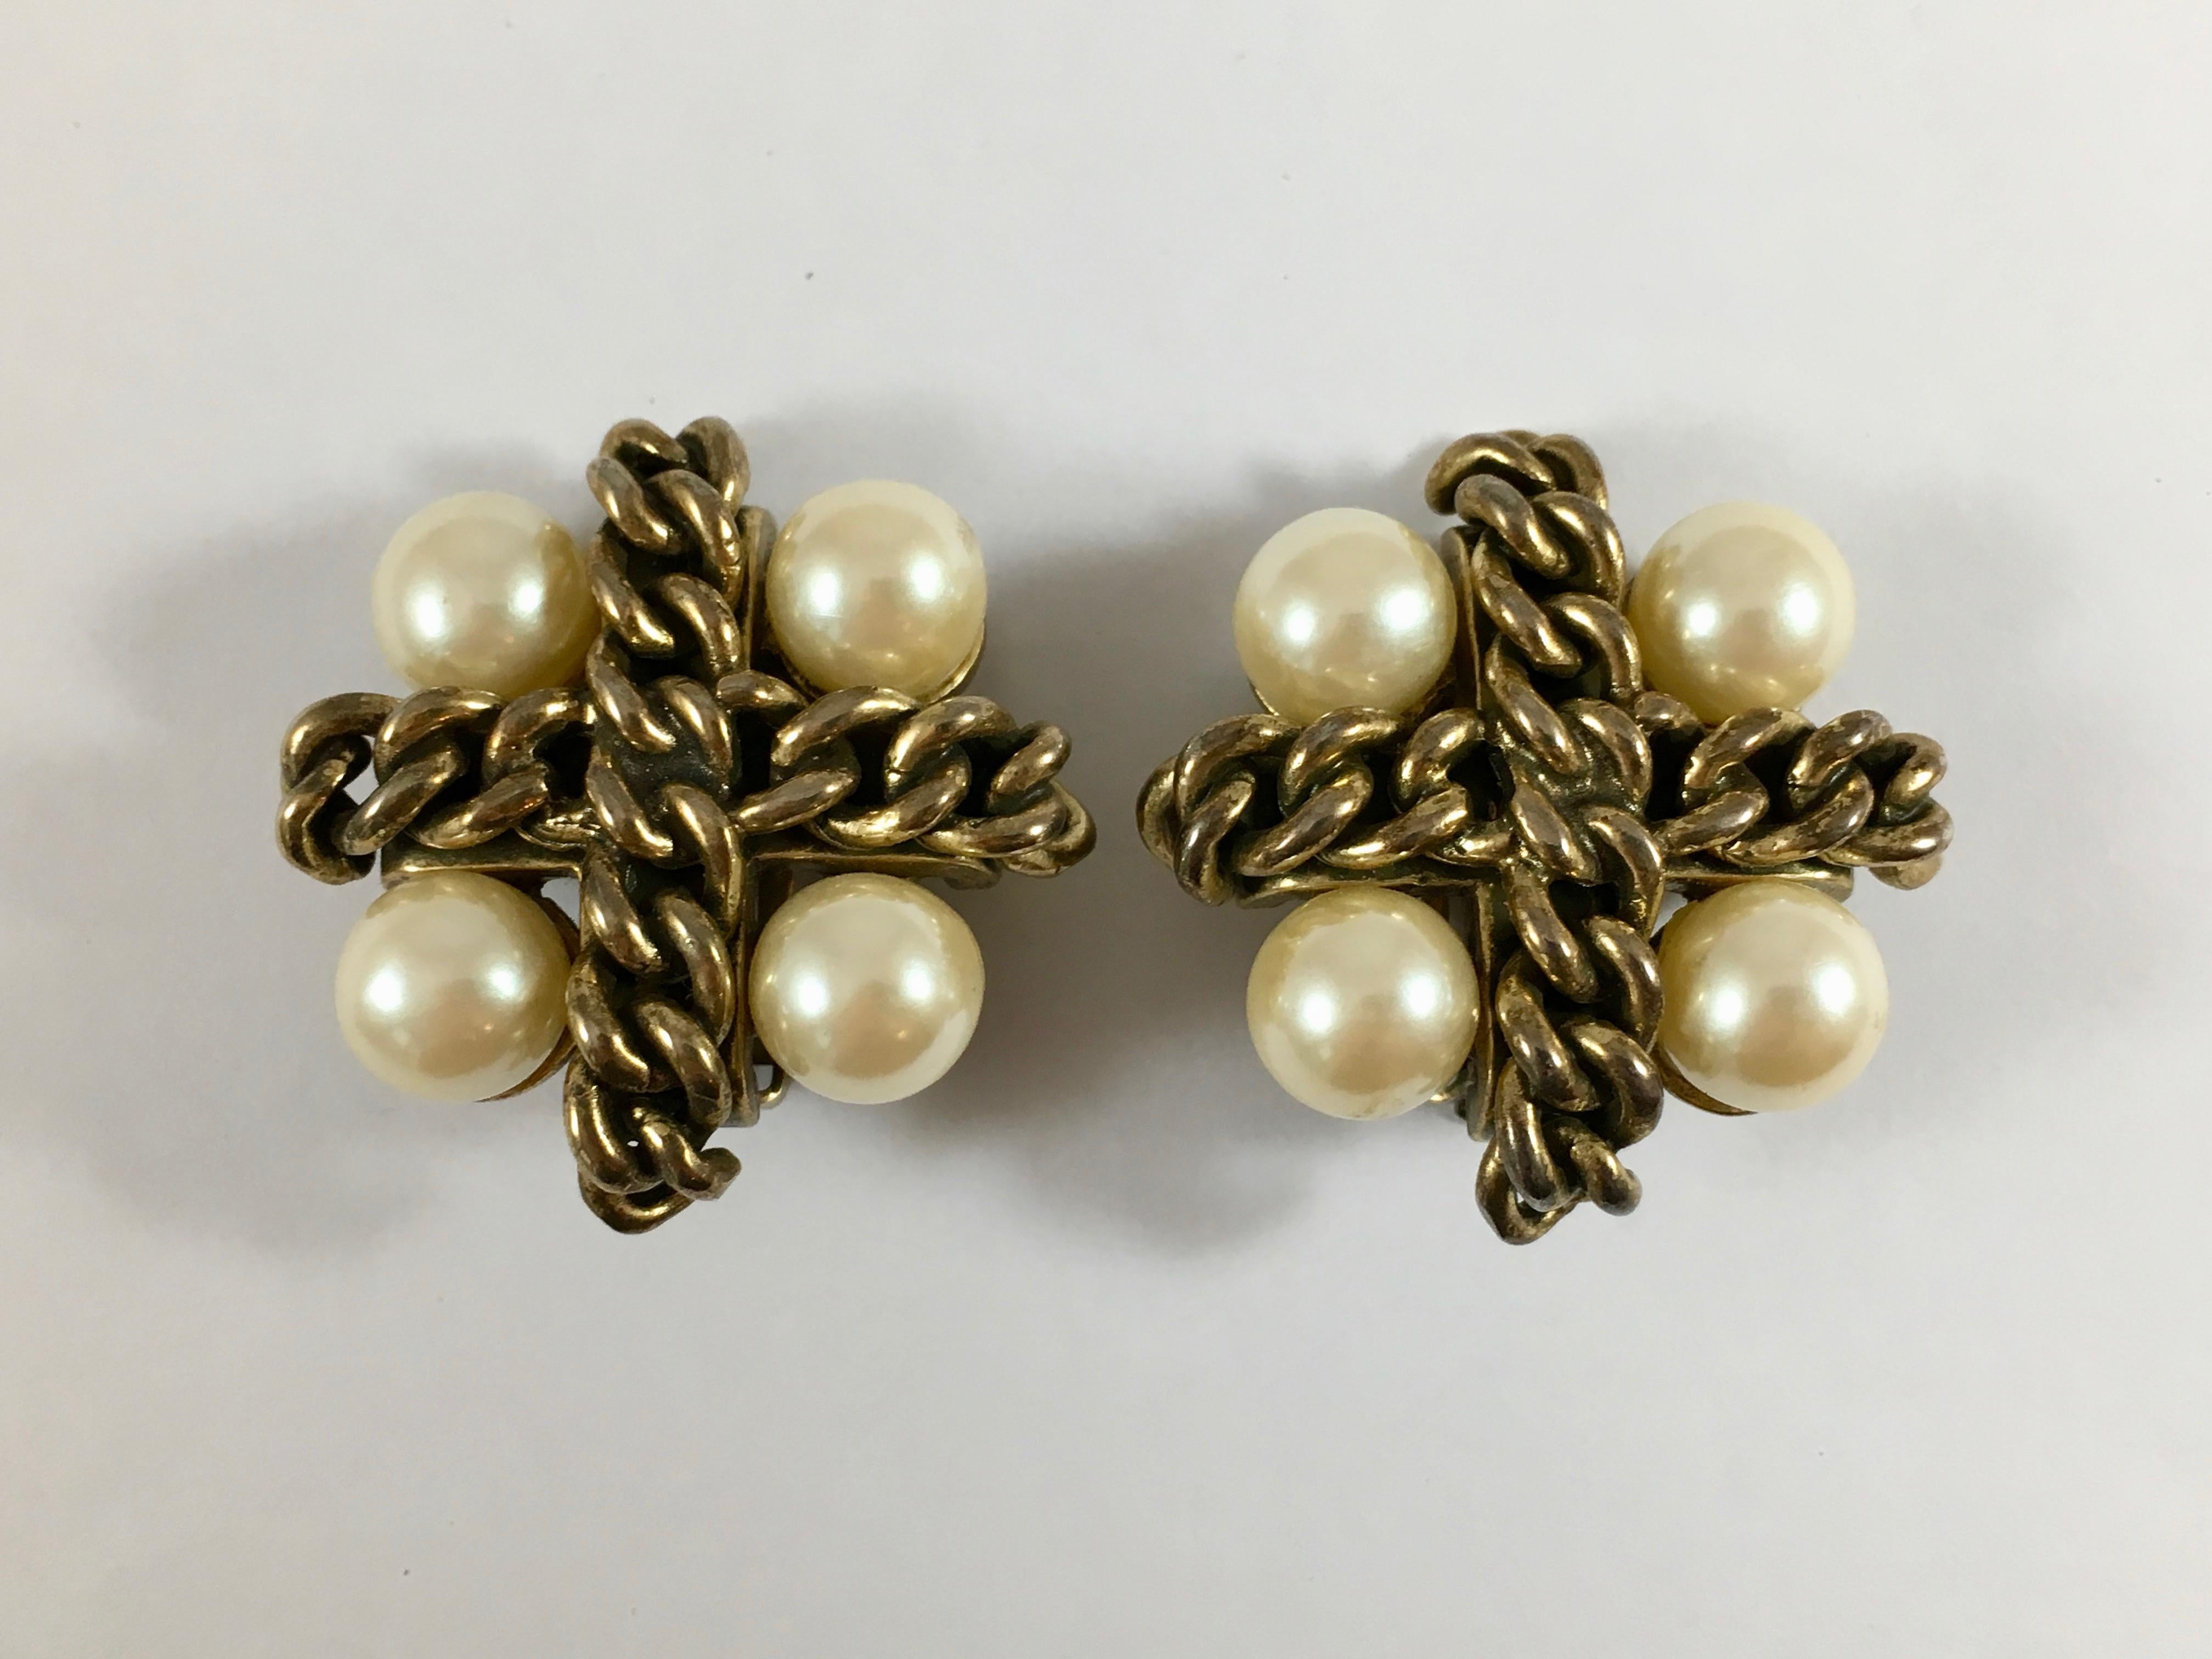 This is a pair of 1970s Kenneth Jay Lane cross clip-on earrings. They are each made out of antiqued metal chain flanked by four pearls. They measure 1 1/2 inches long x 1 1/2 inches wide. One of the earrings is marked 'Kenneth Lane' on the back.